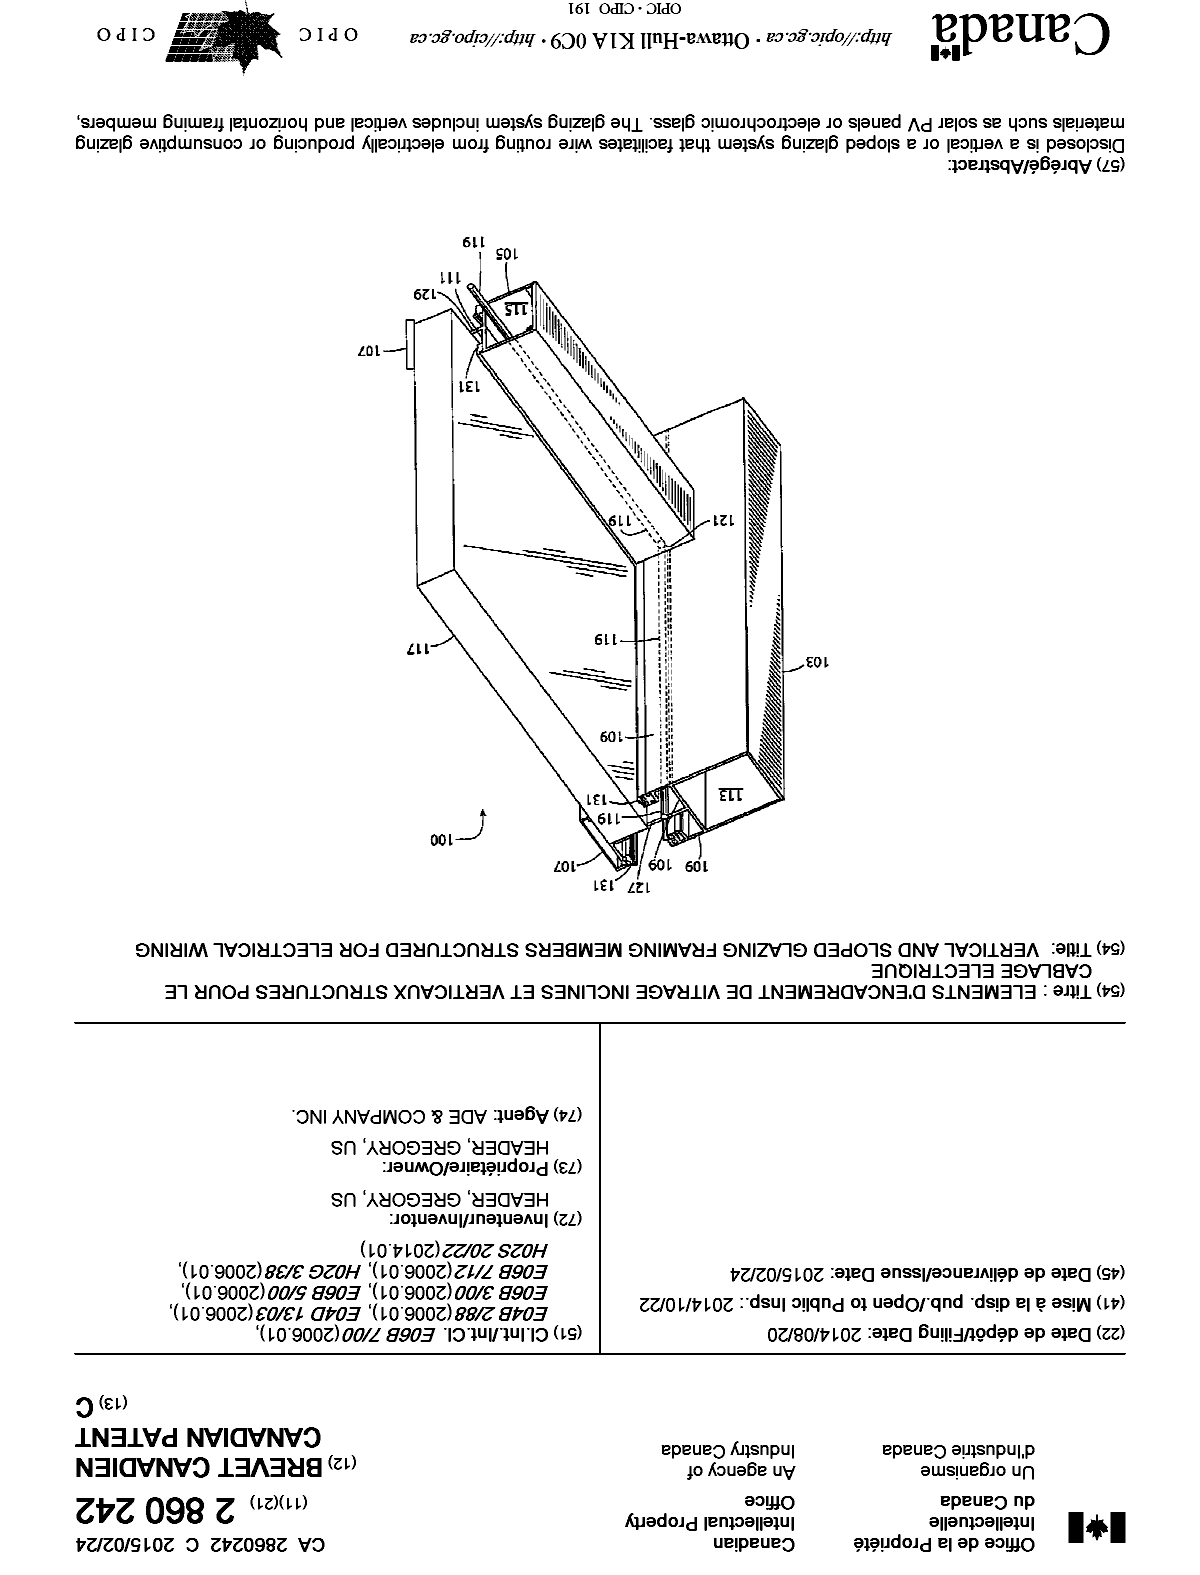 Canadian Patent Document 2860242. Cover Page 20141205. Image 1 of 2